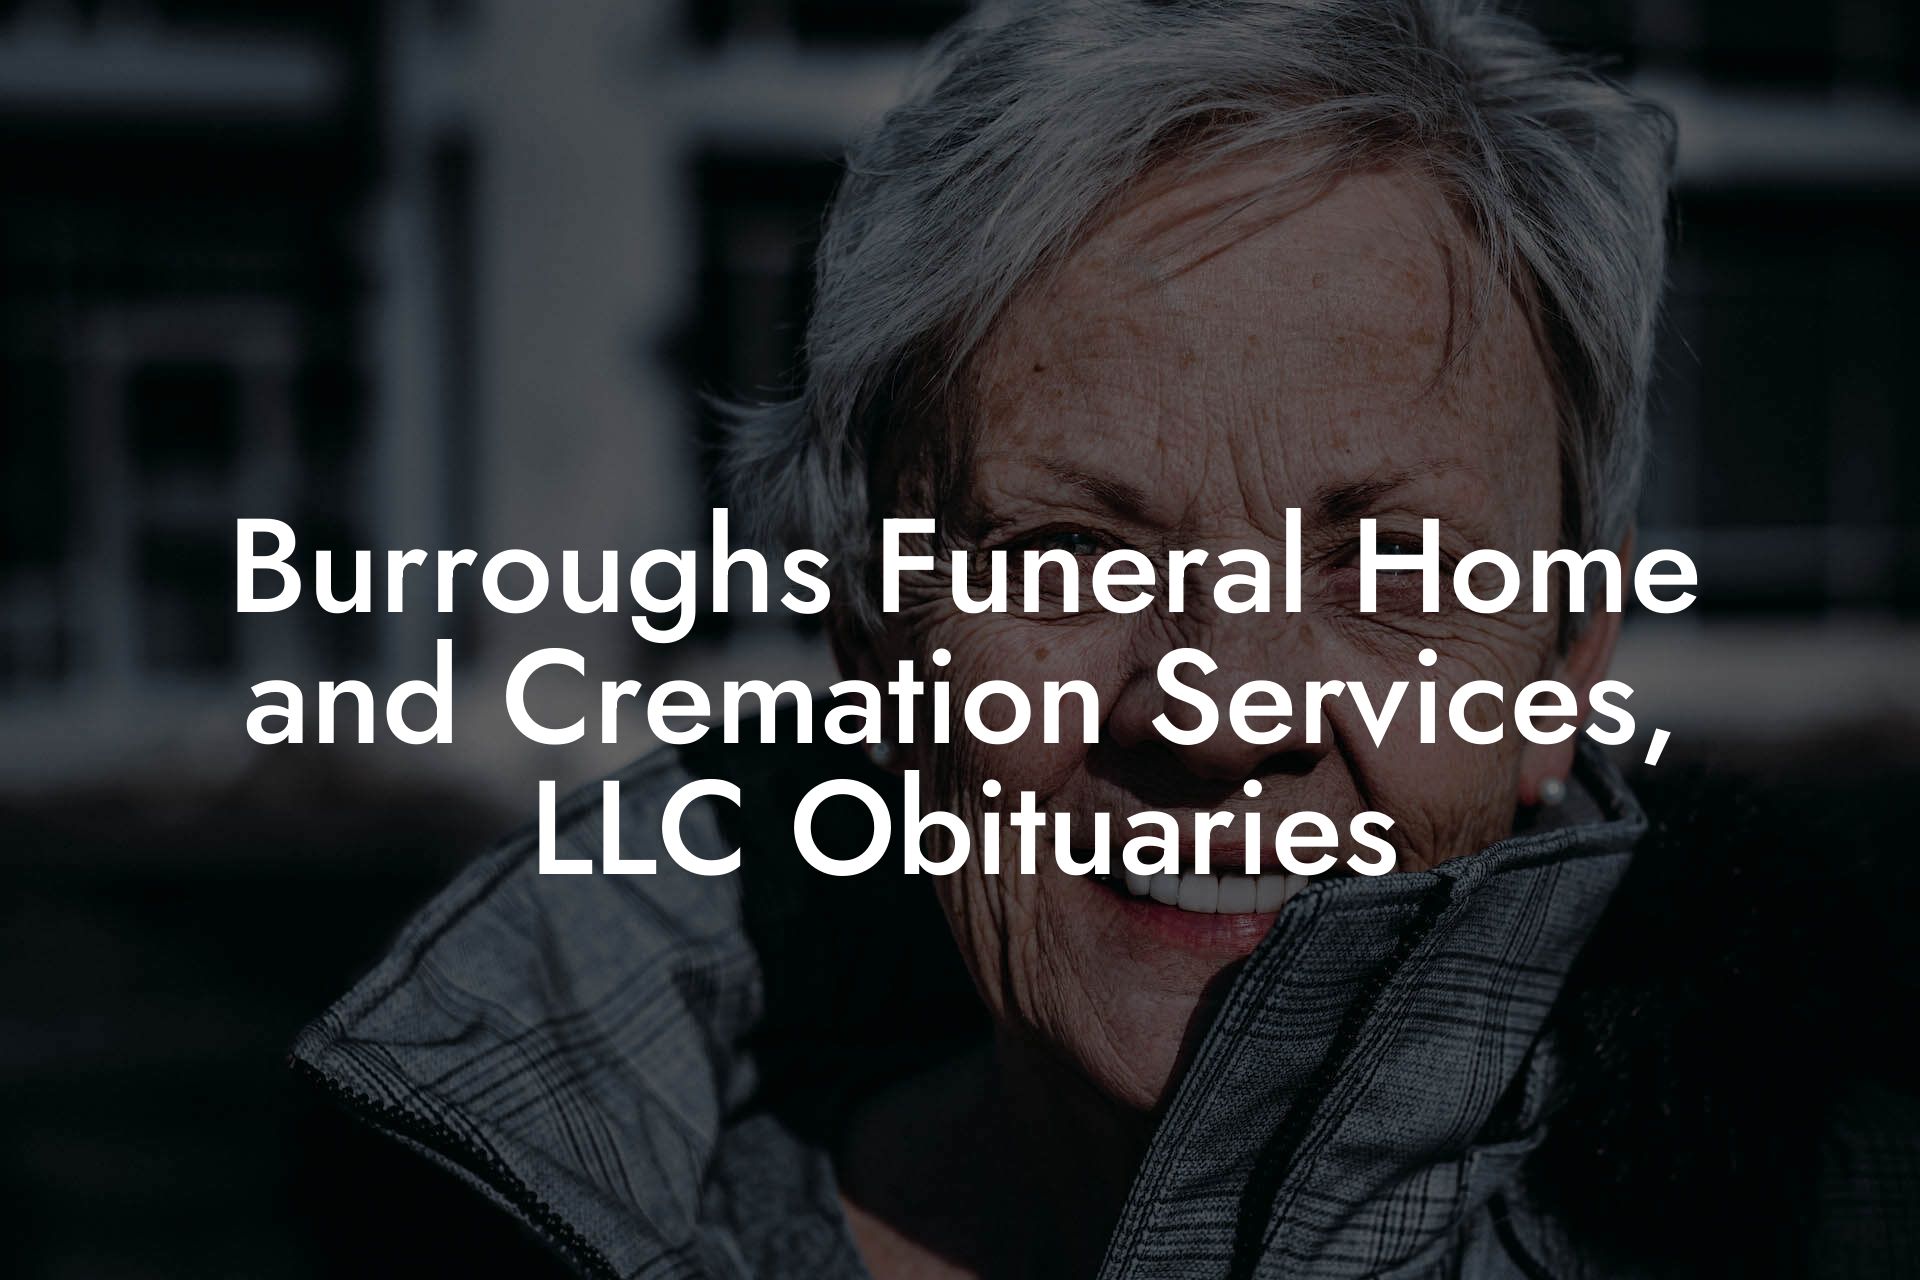 Burroughs Funeral Home and Cremation Services, LLC Obituaries